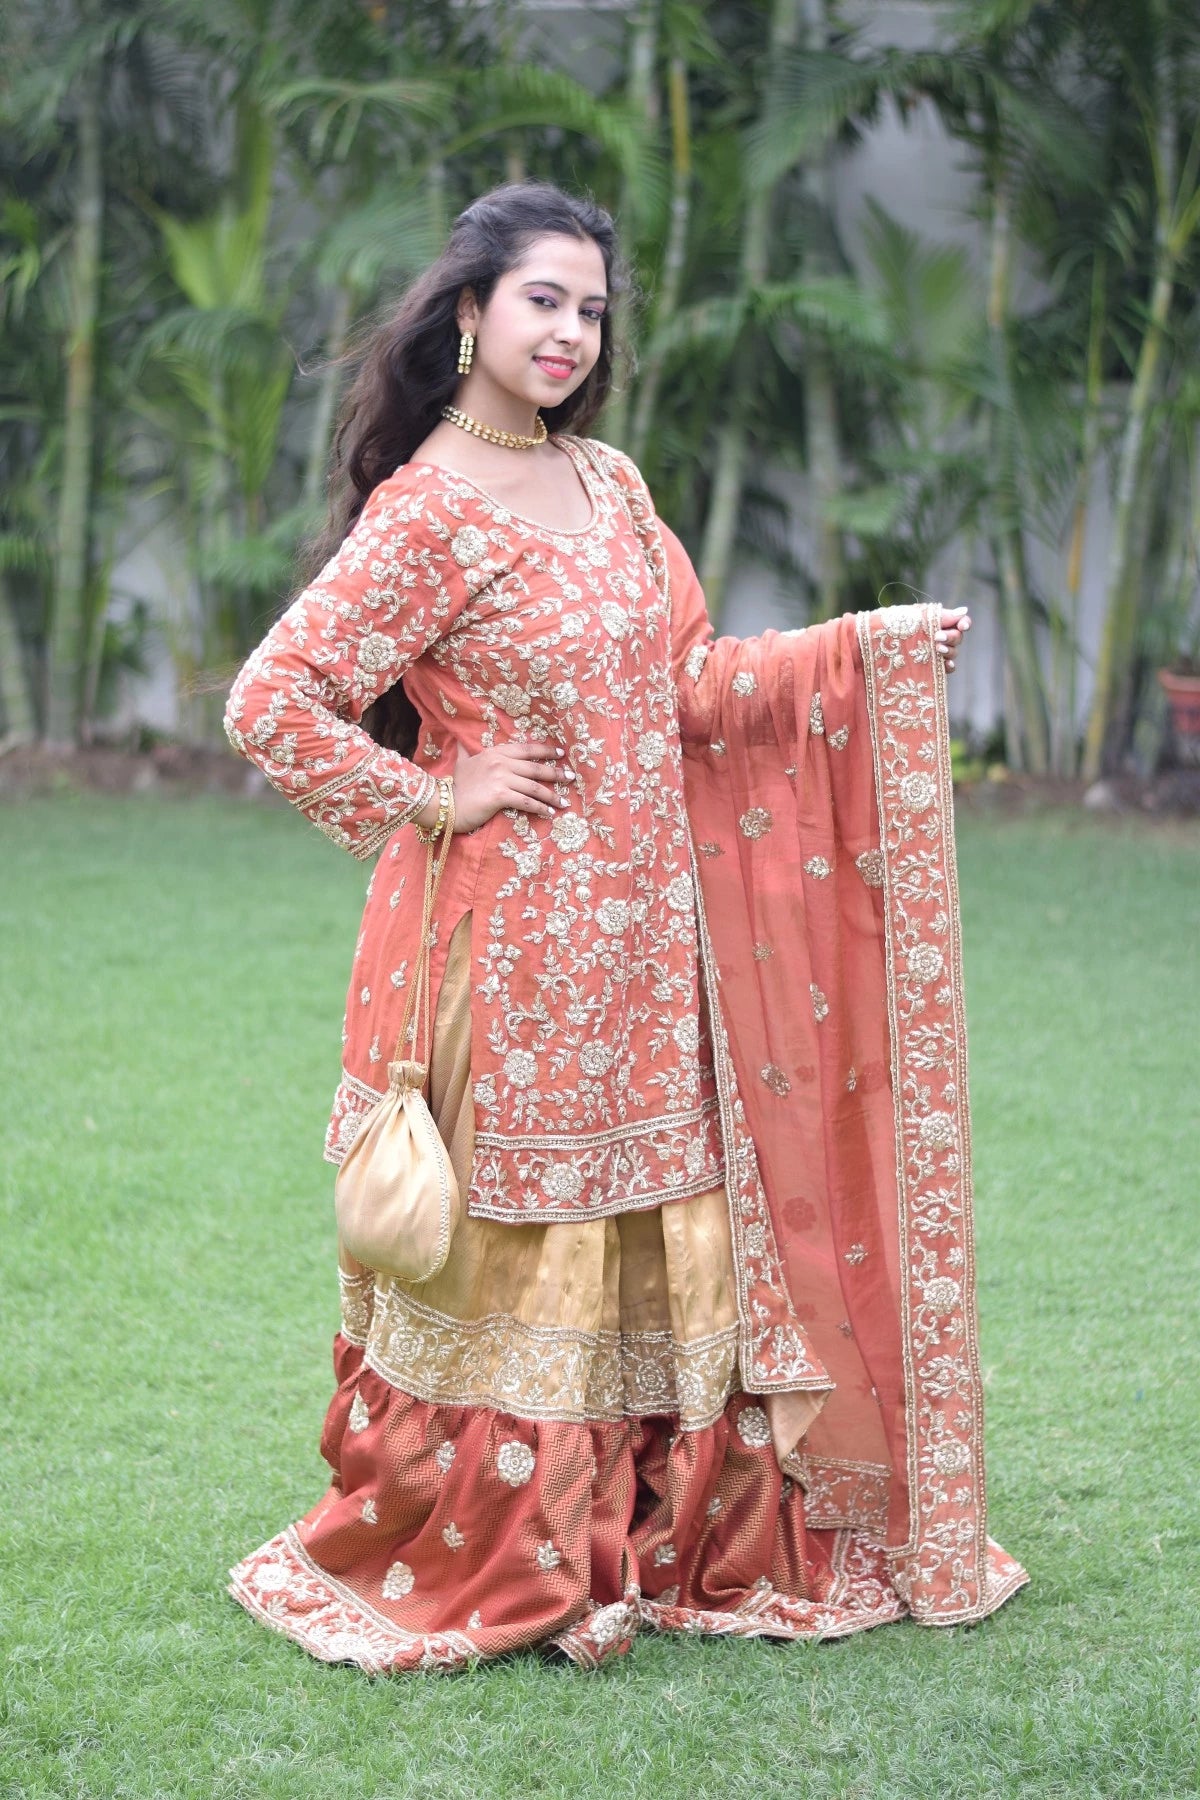 A fashionable lady in a beautifully crafted farshi gharara in golden rust.